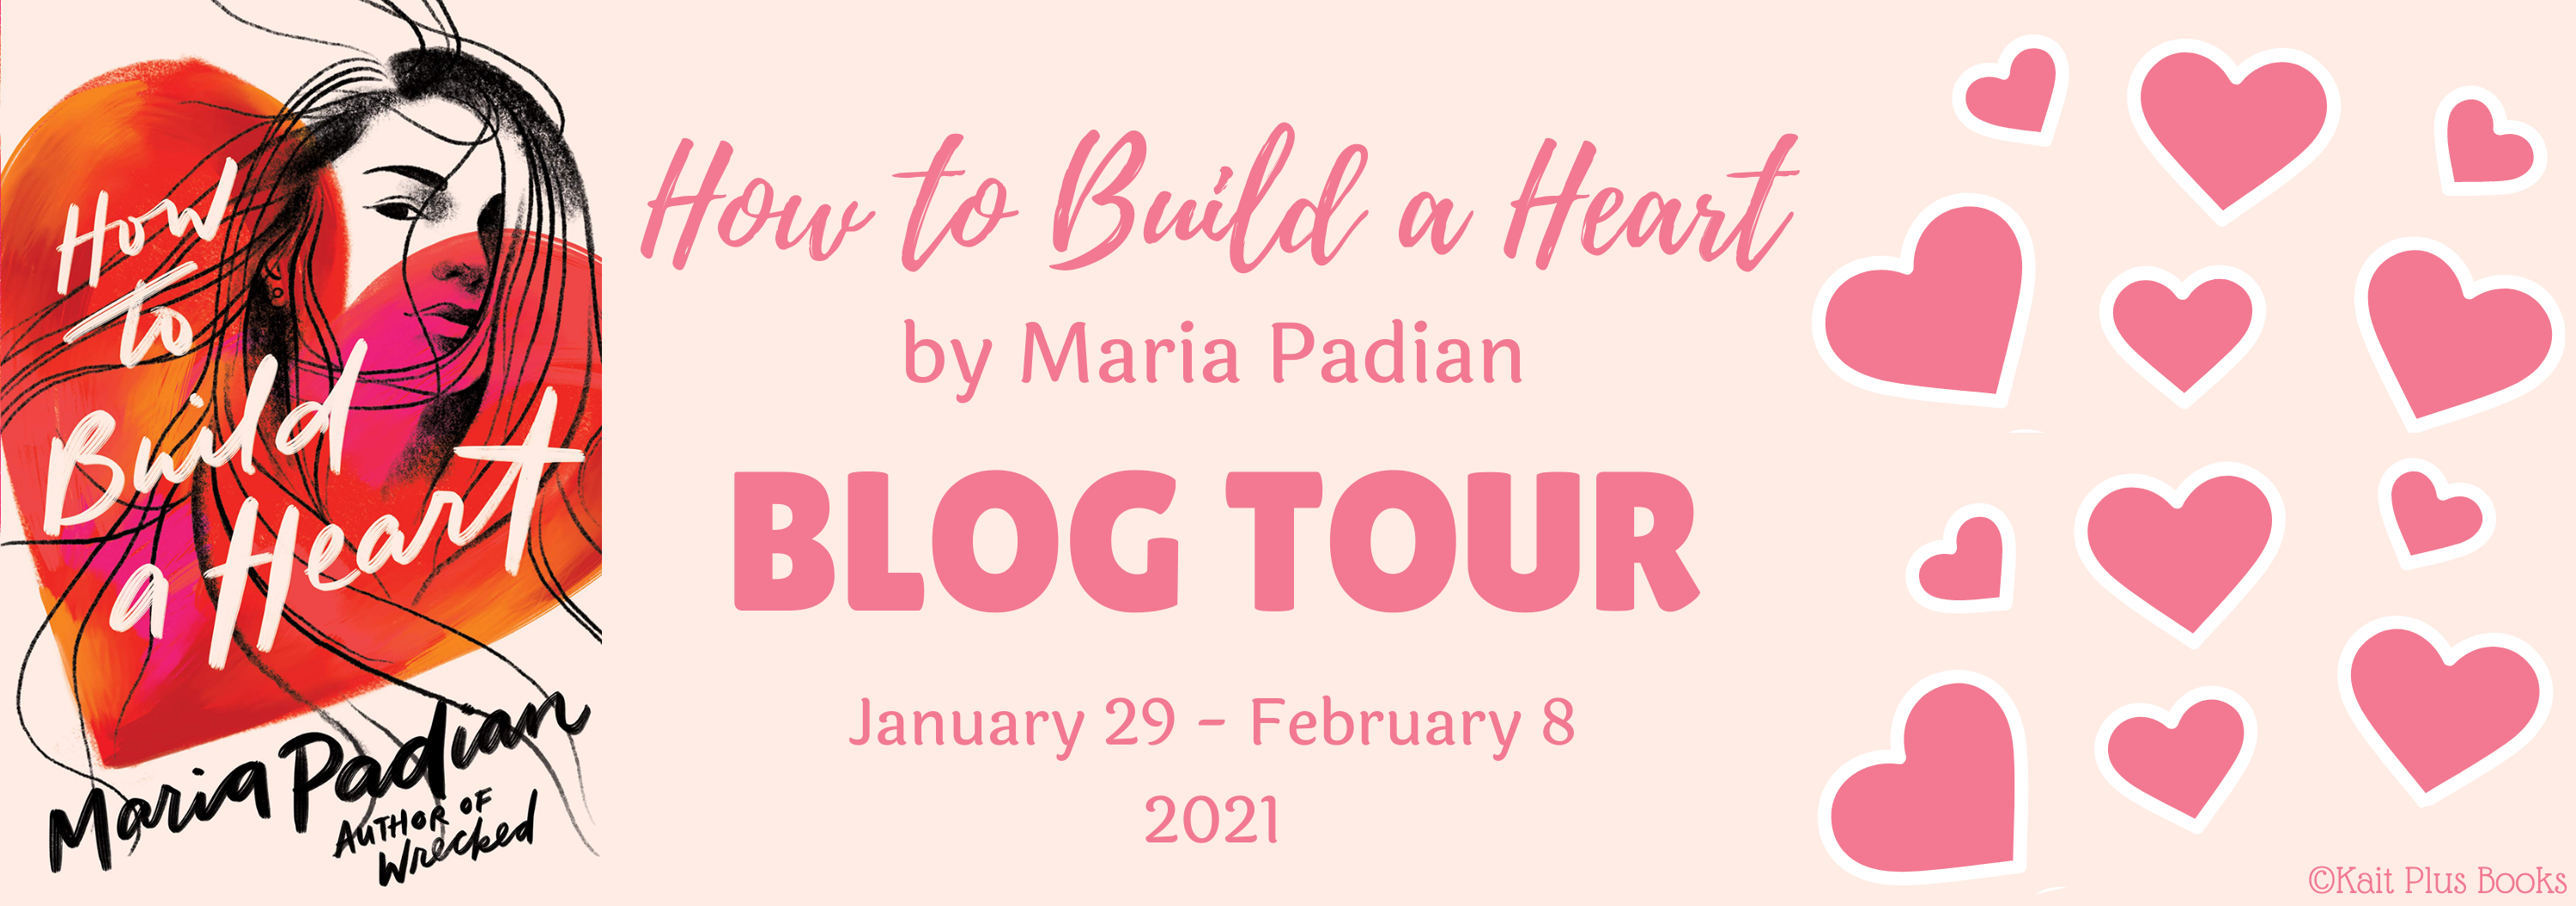 Blog Tour: How to Build a Heart by Maria Padian (Review + Bookstagram!)